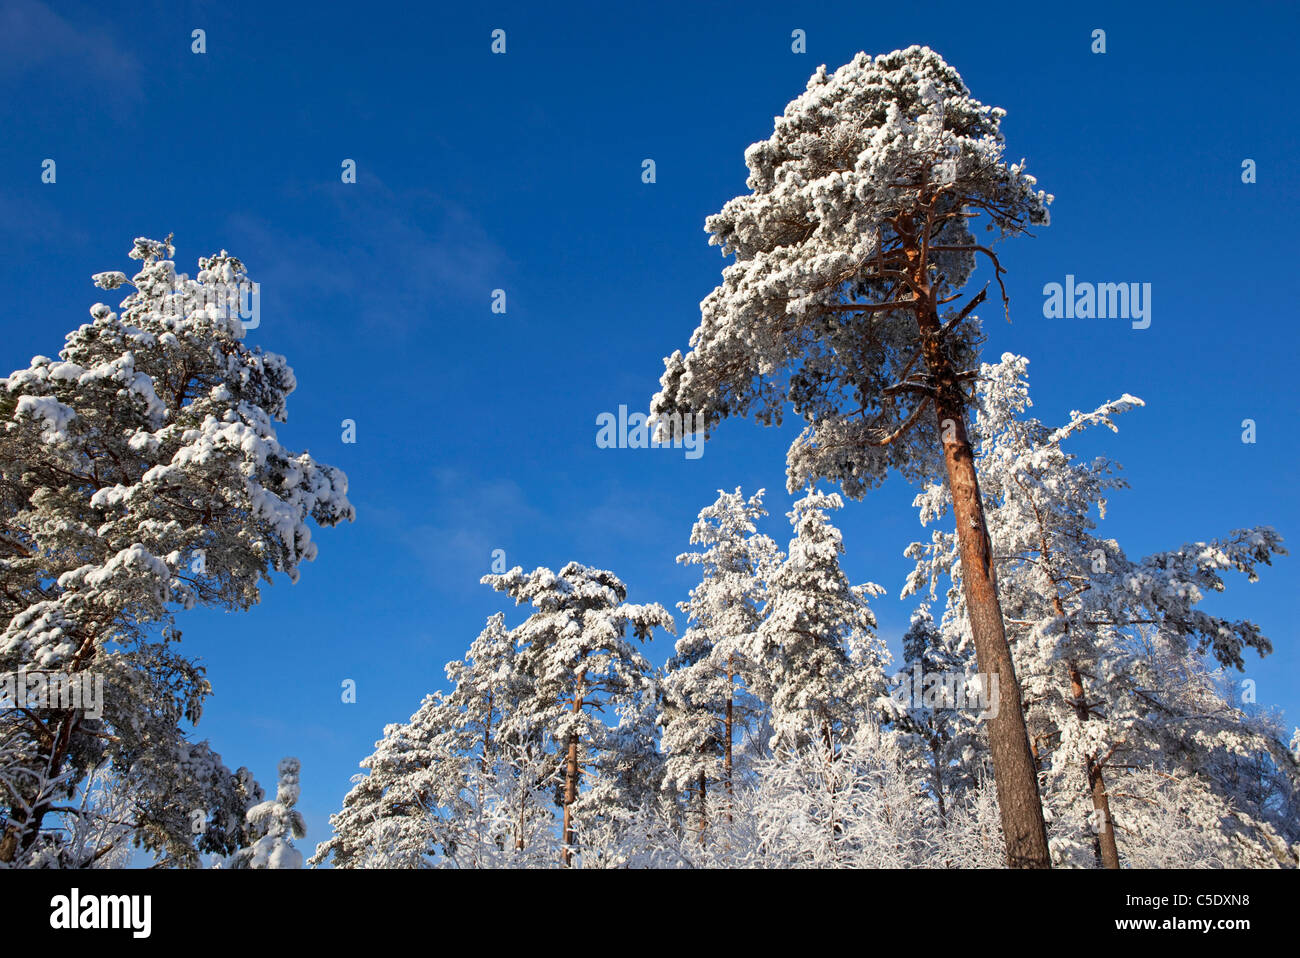 Low angle view of winter trees against clear blue sky Stock Photo